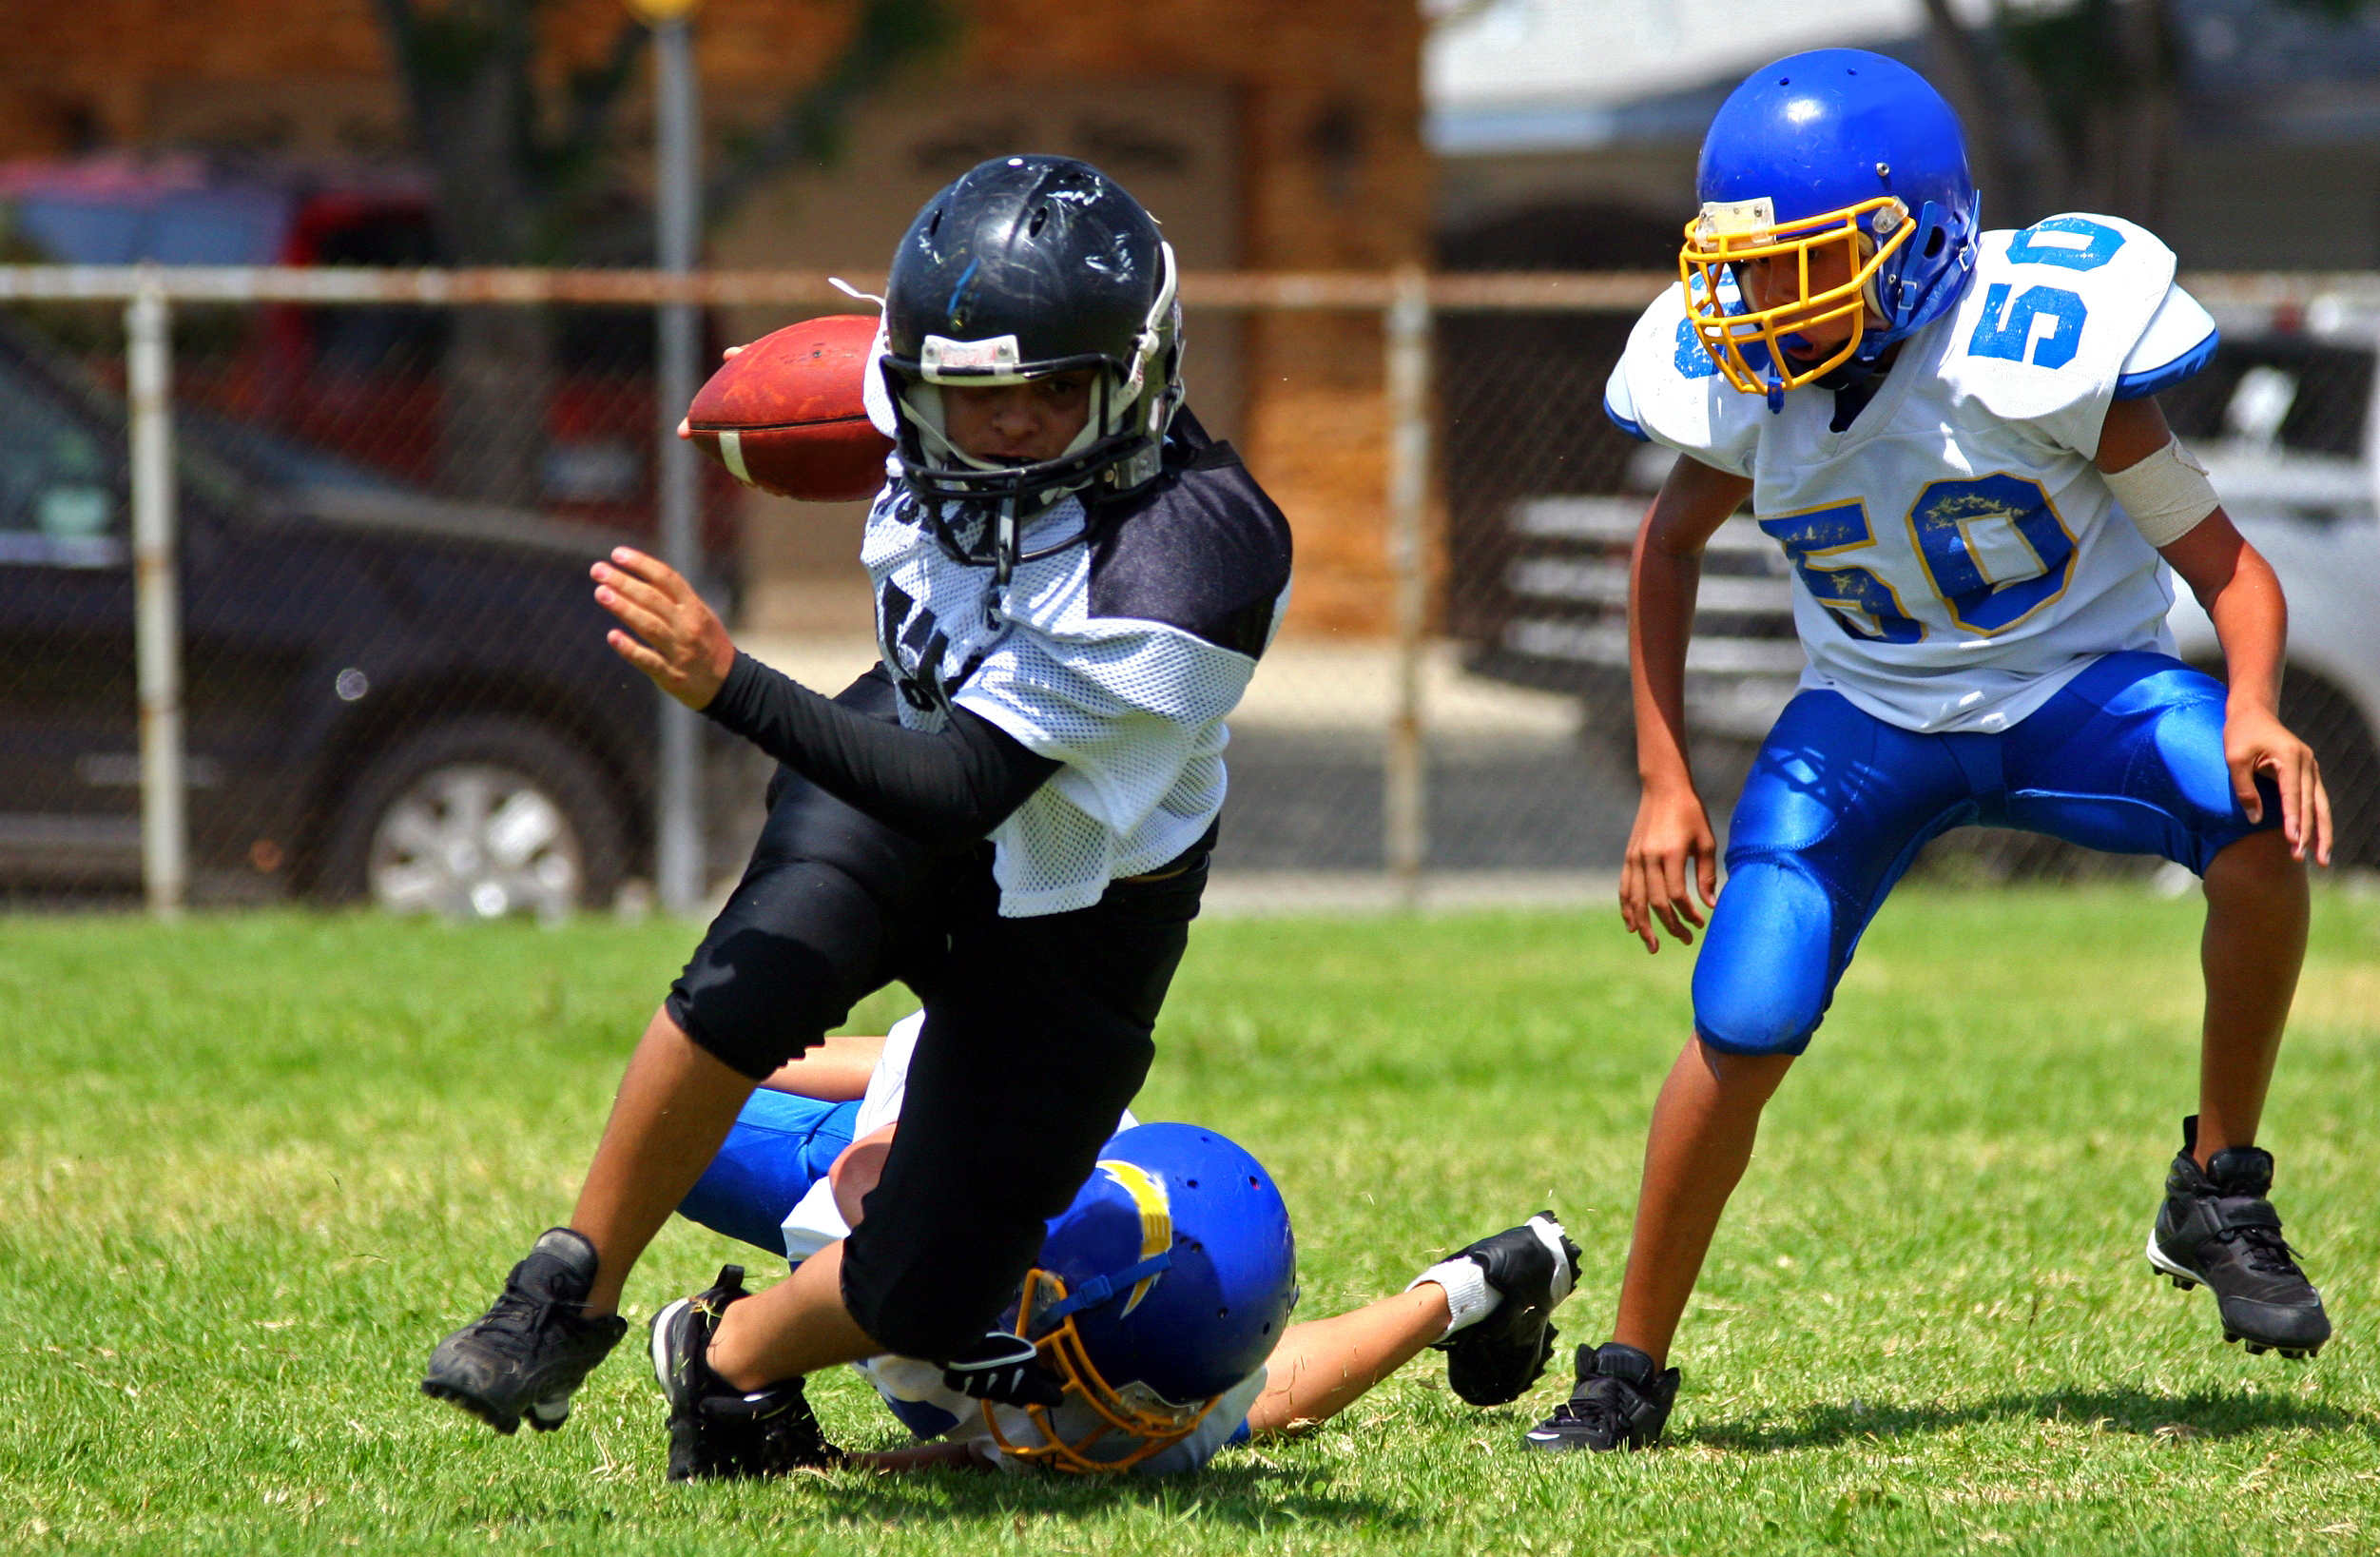 Youth Football Clinics Try A New Angle To Prevent Concussions